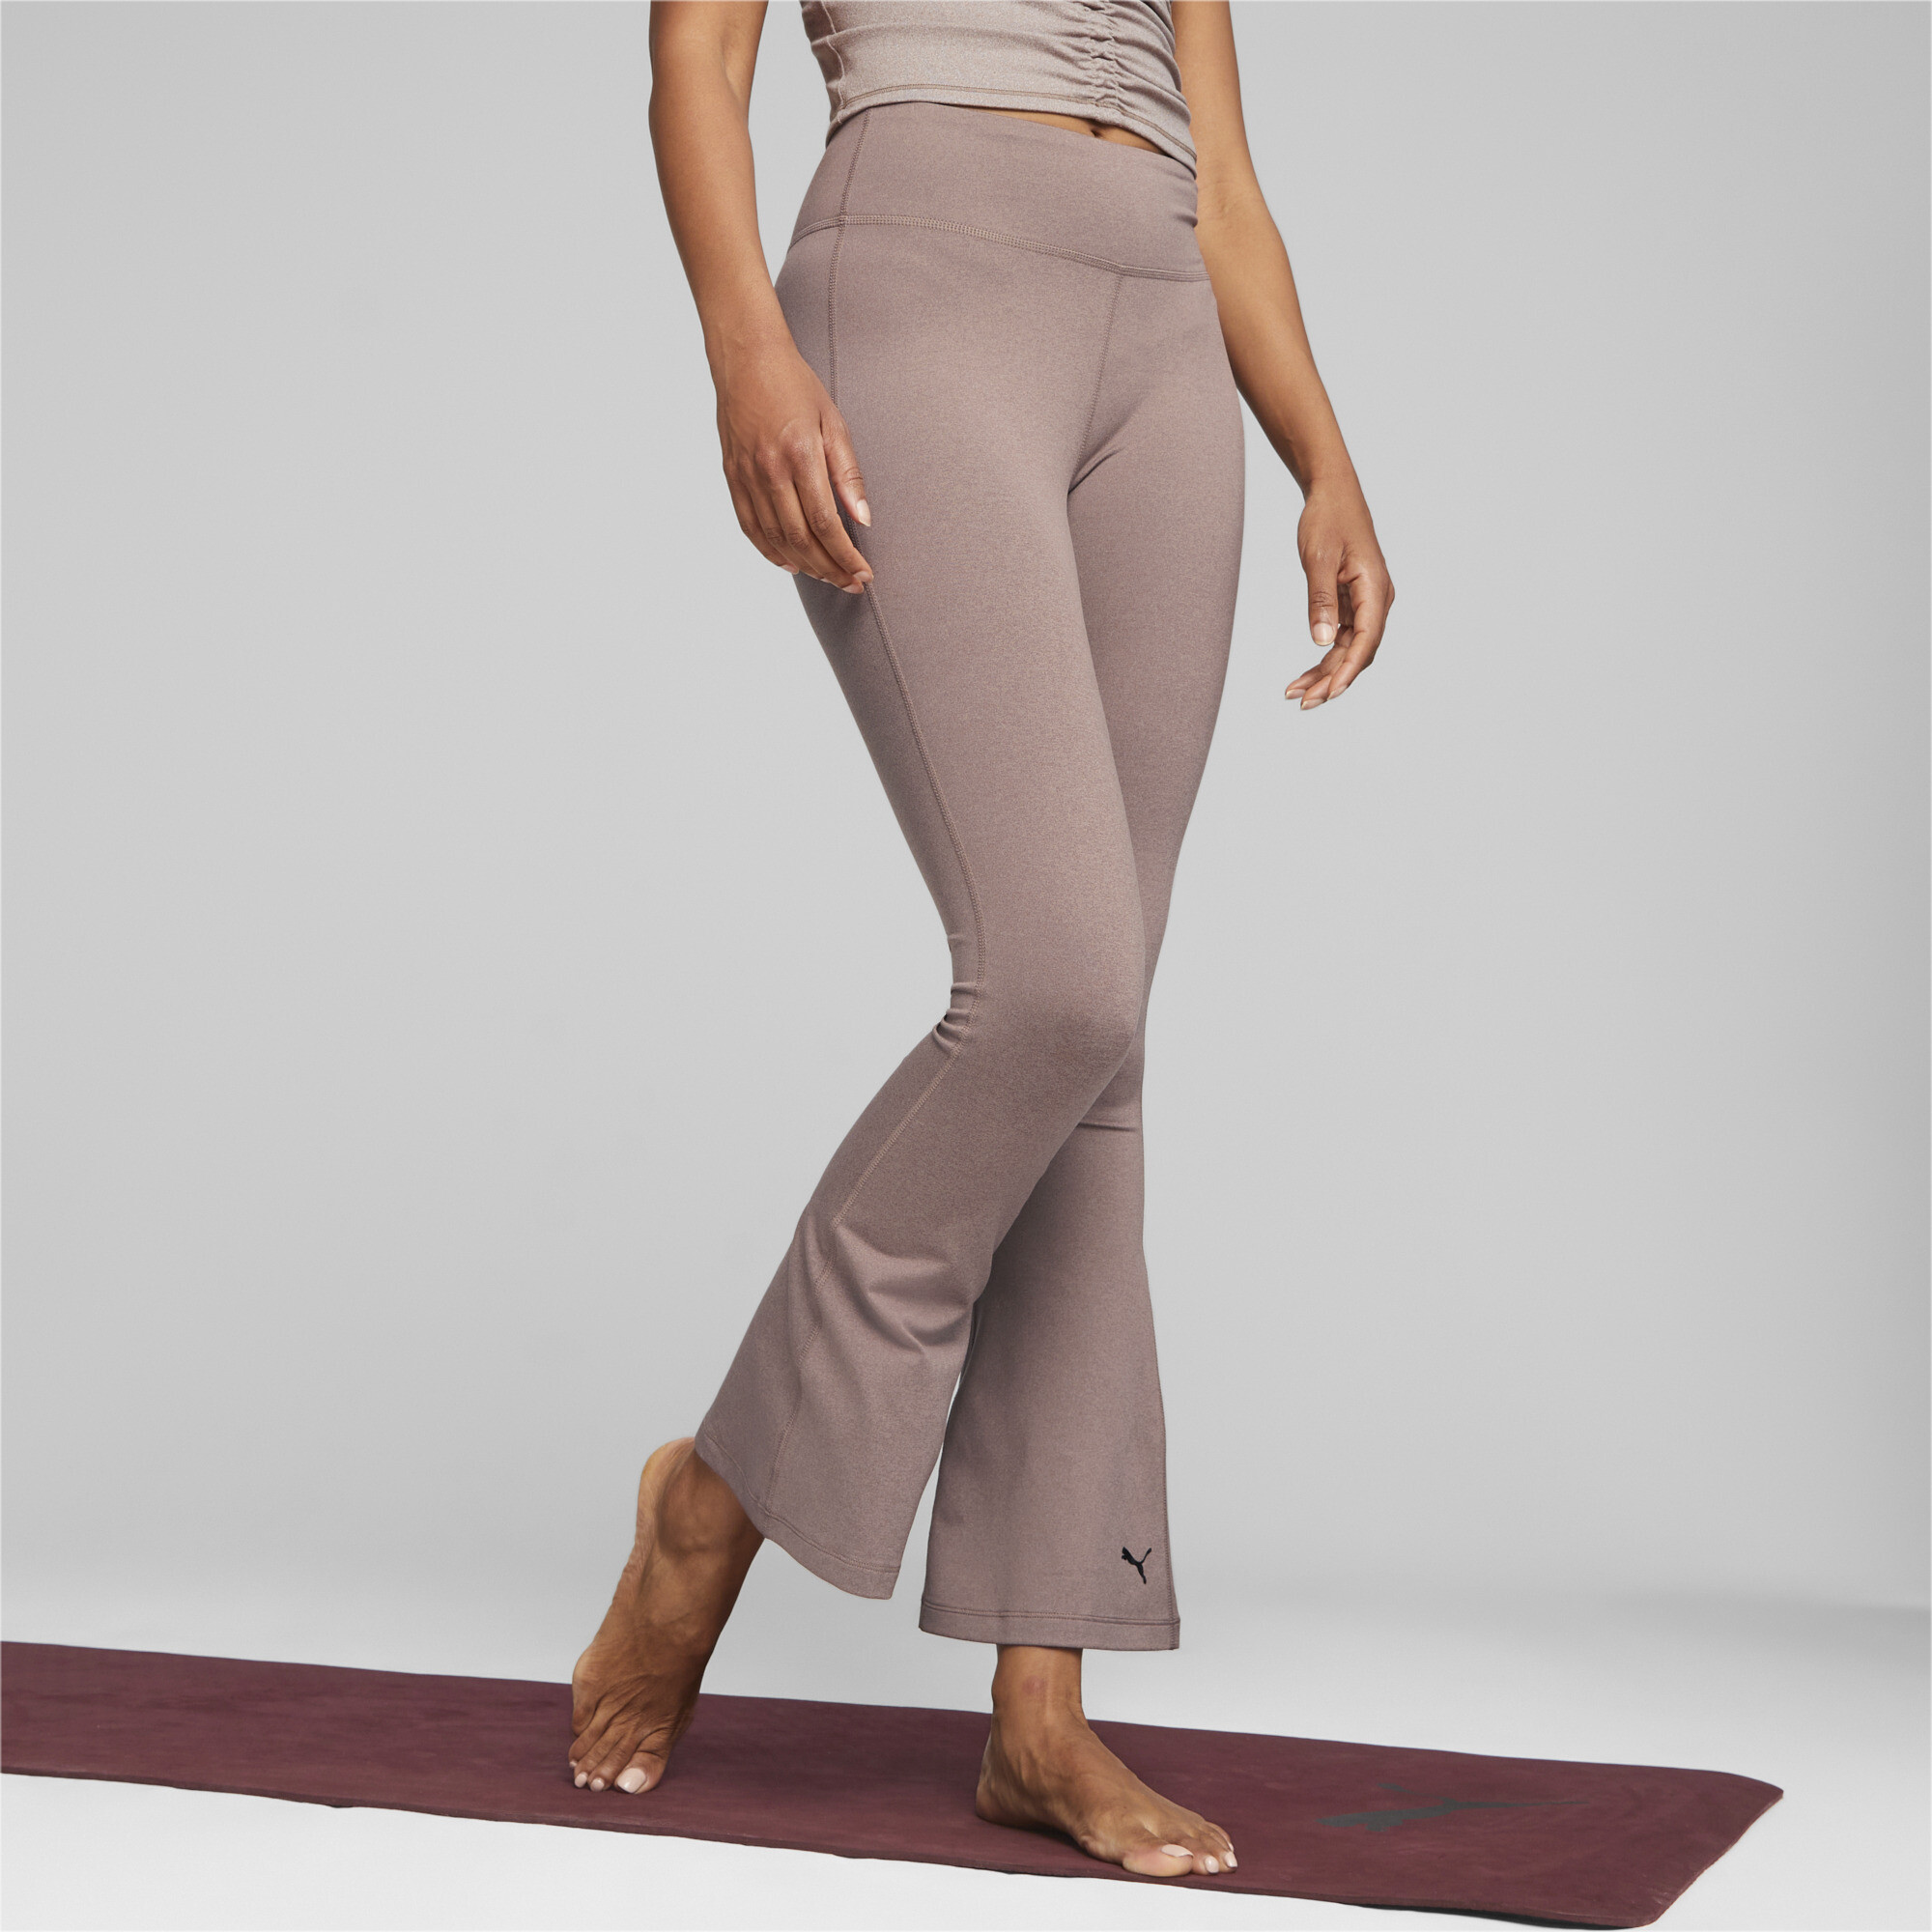 Up 50% off! Flare Leggings, Womens Dress Pants, Womens Workout